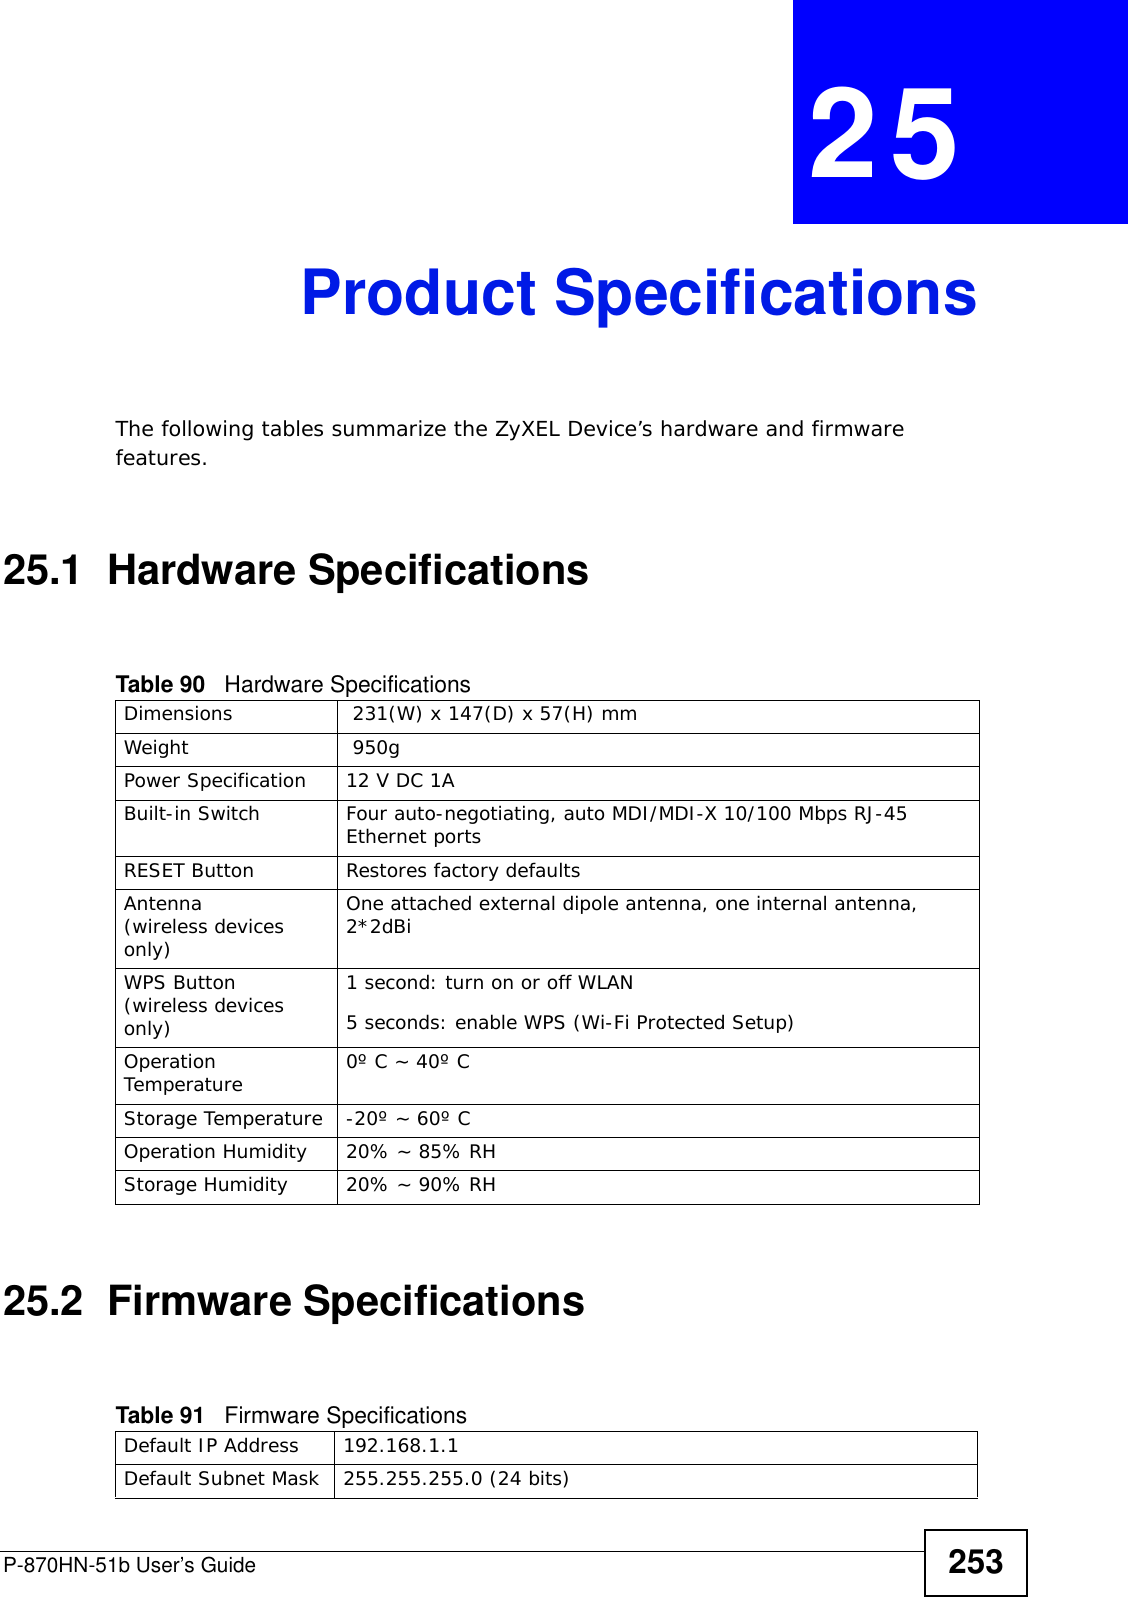 P-870HN-51b User’s Guide 253CHAPTER  25 Product SpecificationsThe following tables summarize the ZyXEL Device’s hardware and firmware features.25.1  Hardware Specifications25.2  Firmware SpecificationsTable 90   Hardware SpecificationsDimensions  231(W) x 147(D) x 57(H) mmWeight  950gPower Specification 12 V DC 1ABuilt-in Switch Four auto-negotiating, auto MDI/MDI-X 10/100 Mbps RJ-45 Ethernet portsRESET Button Restores factory defaultsAntenna (wireless devices only)One attached external dipole antenna, one internal antenna, 2*2dBiWPS Button (wireless devices only)1 second: turn on or off WLAN5 seconds: enable WPS (Wi-Fi Protected Setup)Operation Temperature 0º C ~ 40º CStorage Temperature -20º ~ 60º COperation Humidity 20% ~ 85% RHStorage Humidity 20% ~ 90% RHTable 91   Firmware Specifications Default IP Address 192.168.1.1Default Subnet Mask 255.255.255.0 (24 bits)